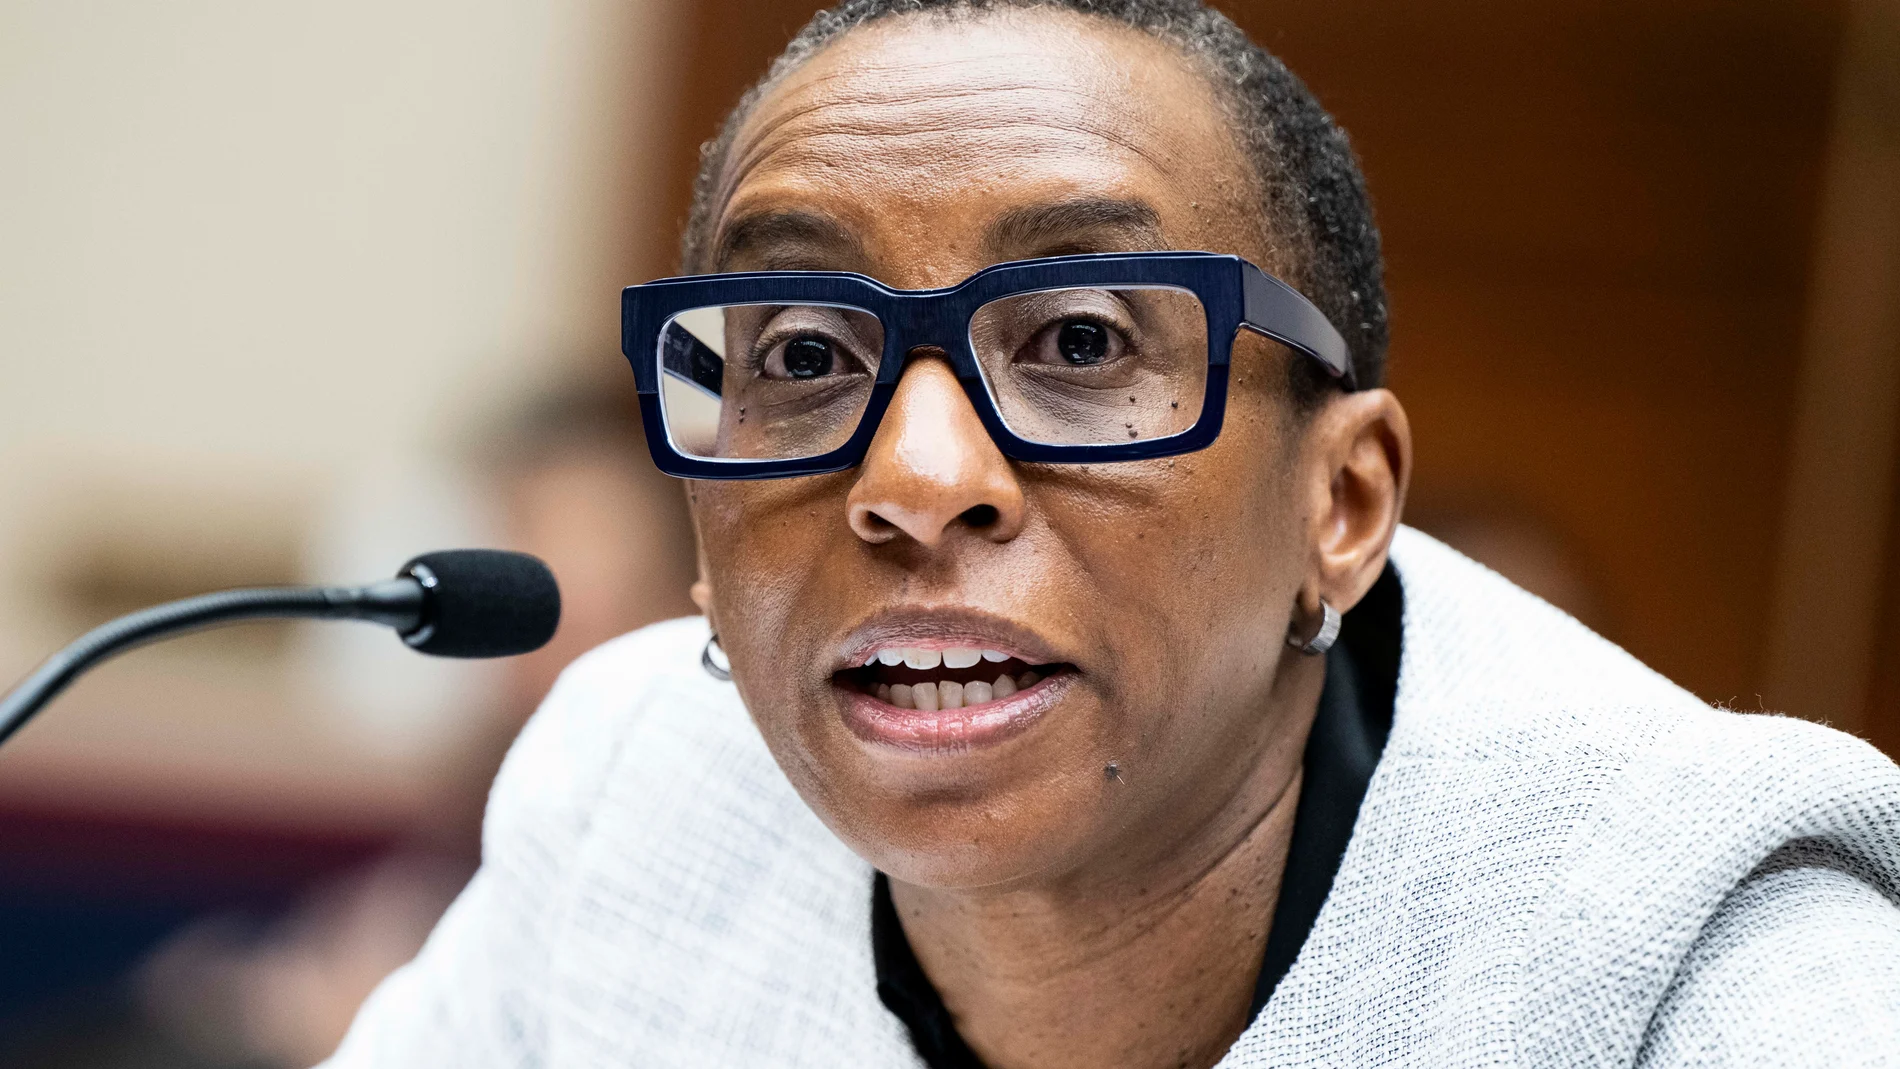 January 2, 2024: CLAUDINE GAY said Tuesday she was resigning the presidency of Harvard University. Gay faced harsh criticism over the school's response to antisemitic incidents as well as an ongoing plagiarism scandal. FILE PHOTO: December 5, 2023, Washington, District of Columbia, USA: Claudine Gay, President, Harvard University, speaking at a House Committee on Education and the Workforce hearing on campus antisemitism at the U.S. Capitol. 05/12/2023